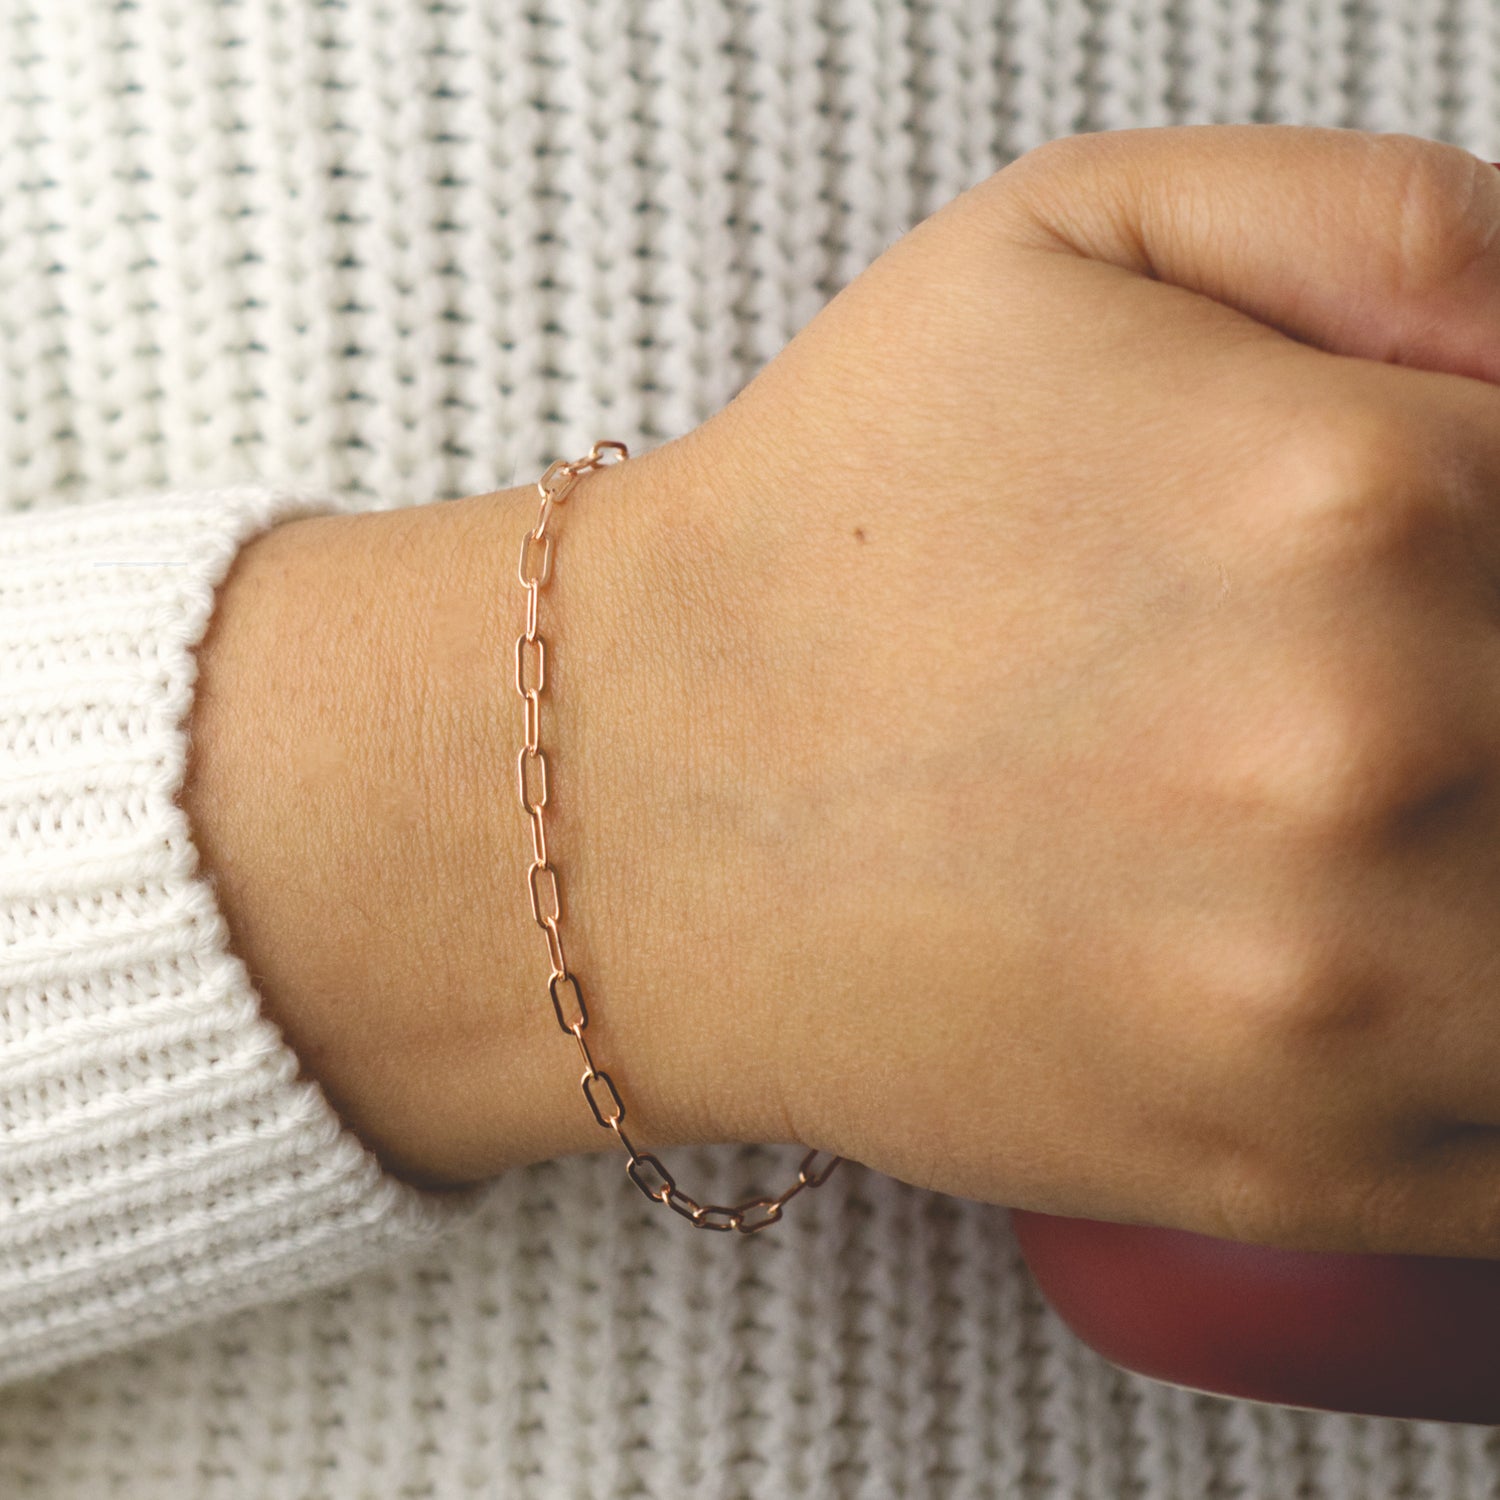 Woman wearing a 14K rose gold fill paperclip chain bracelet with a dainty style (medium) link size